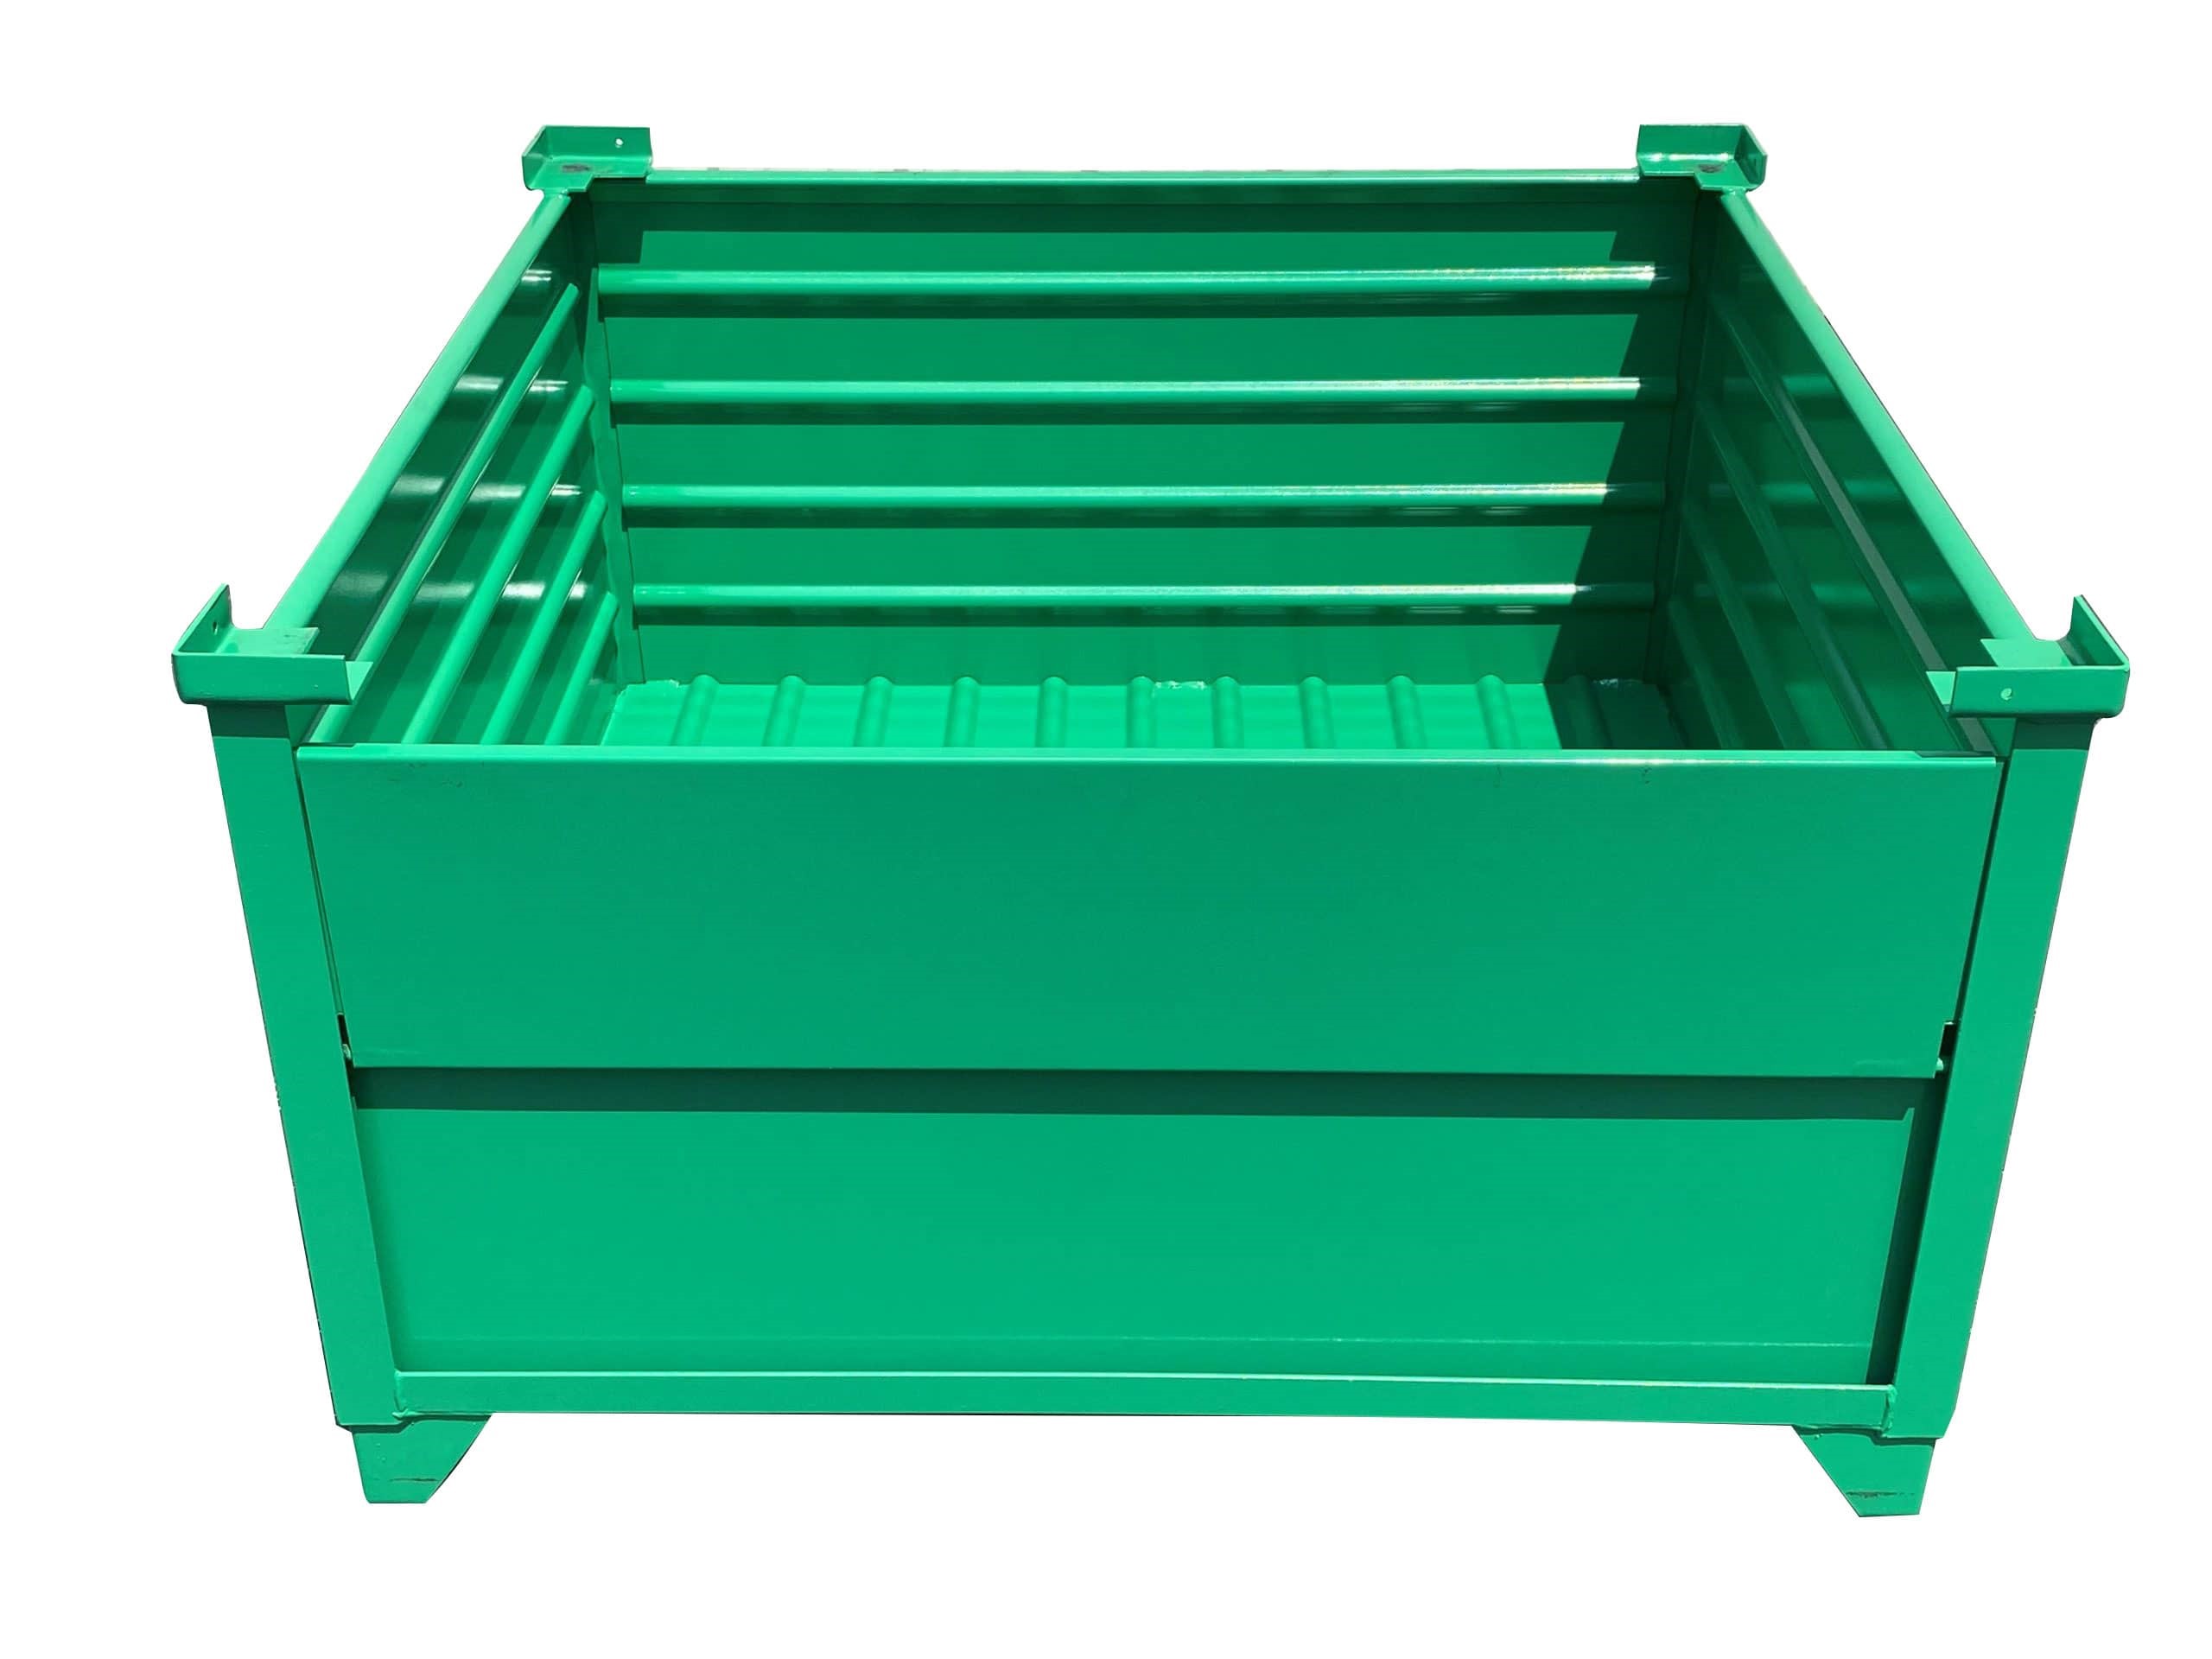 Industrial Automotive Rigid Sheet Metal Steel Bins and Containers